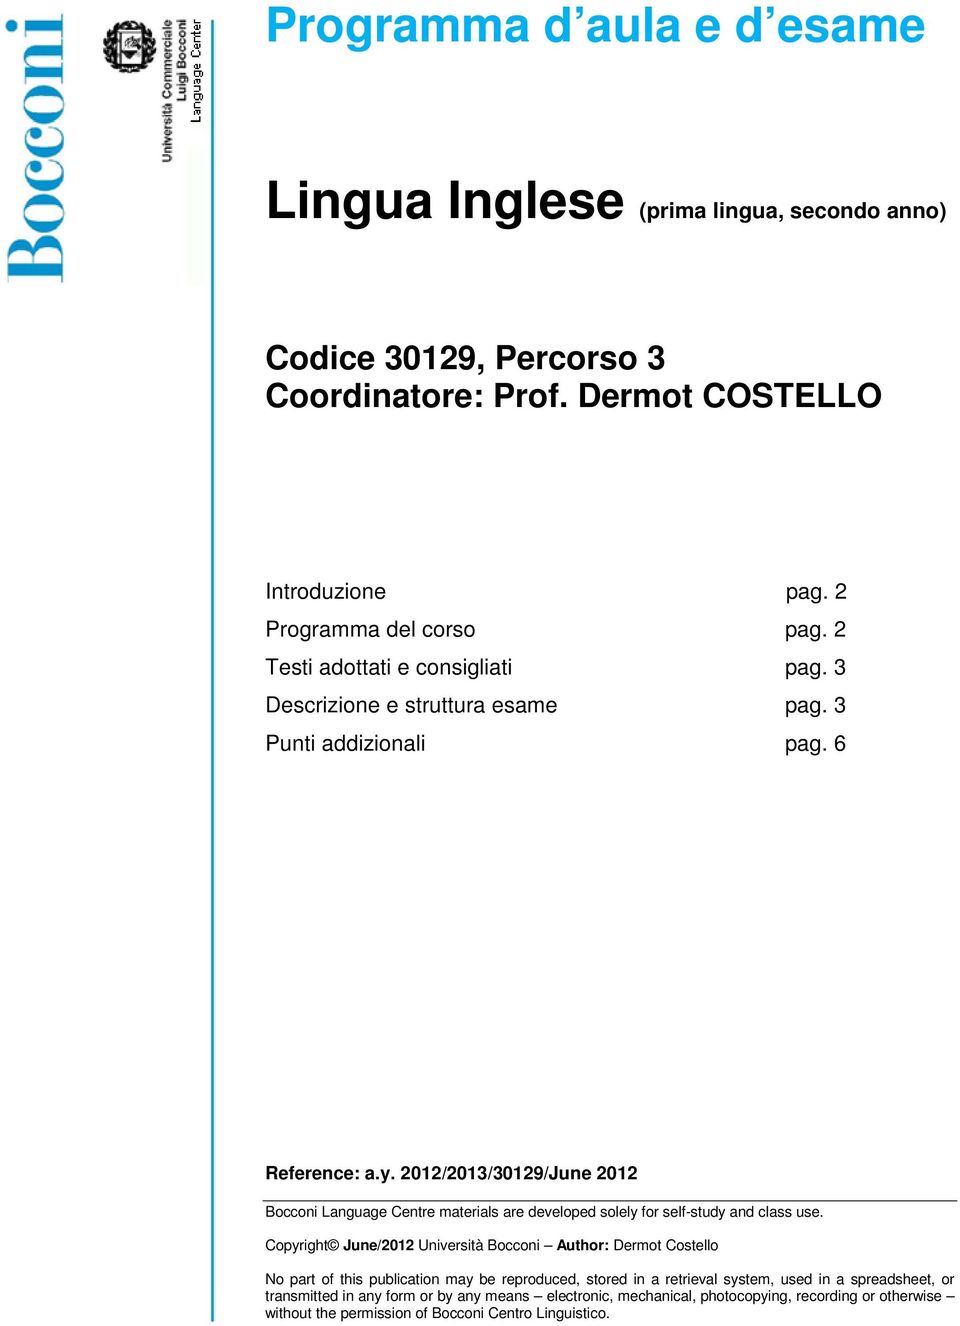 2012/2013/30129/June 2012 Bocconi Language Centre materials are developed solely for self-study and class use.